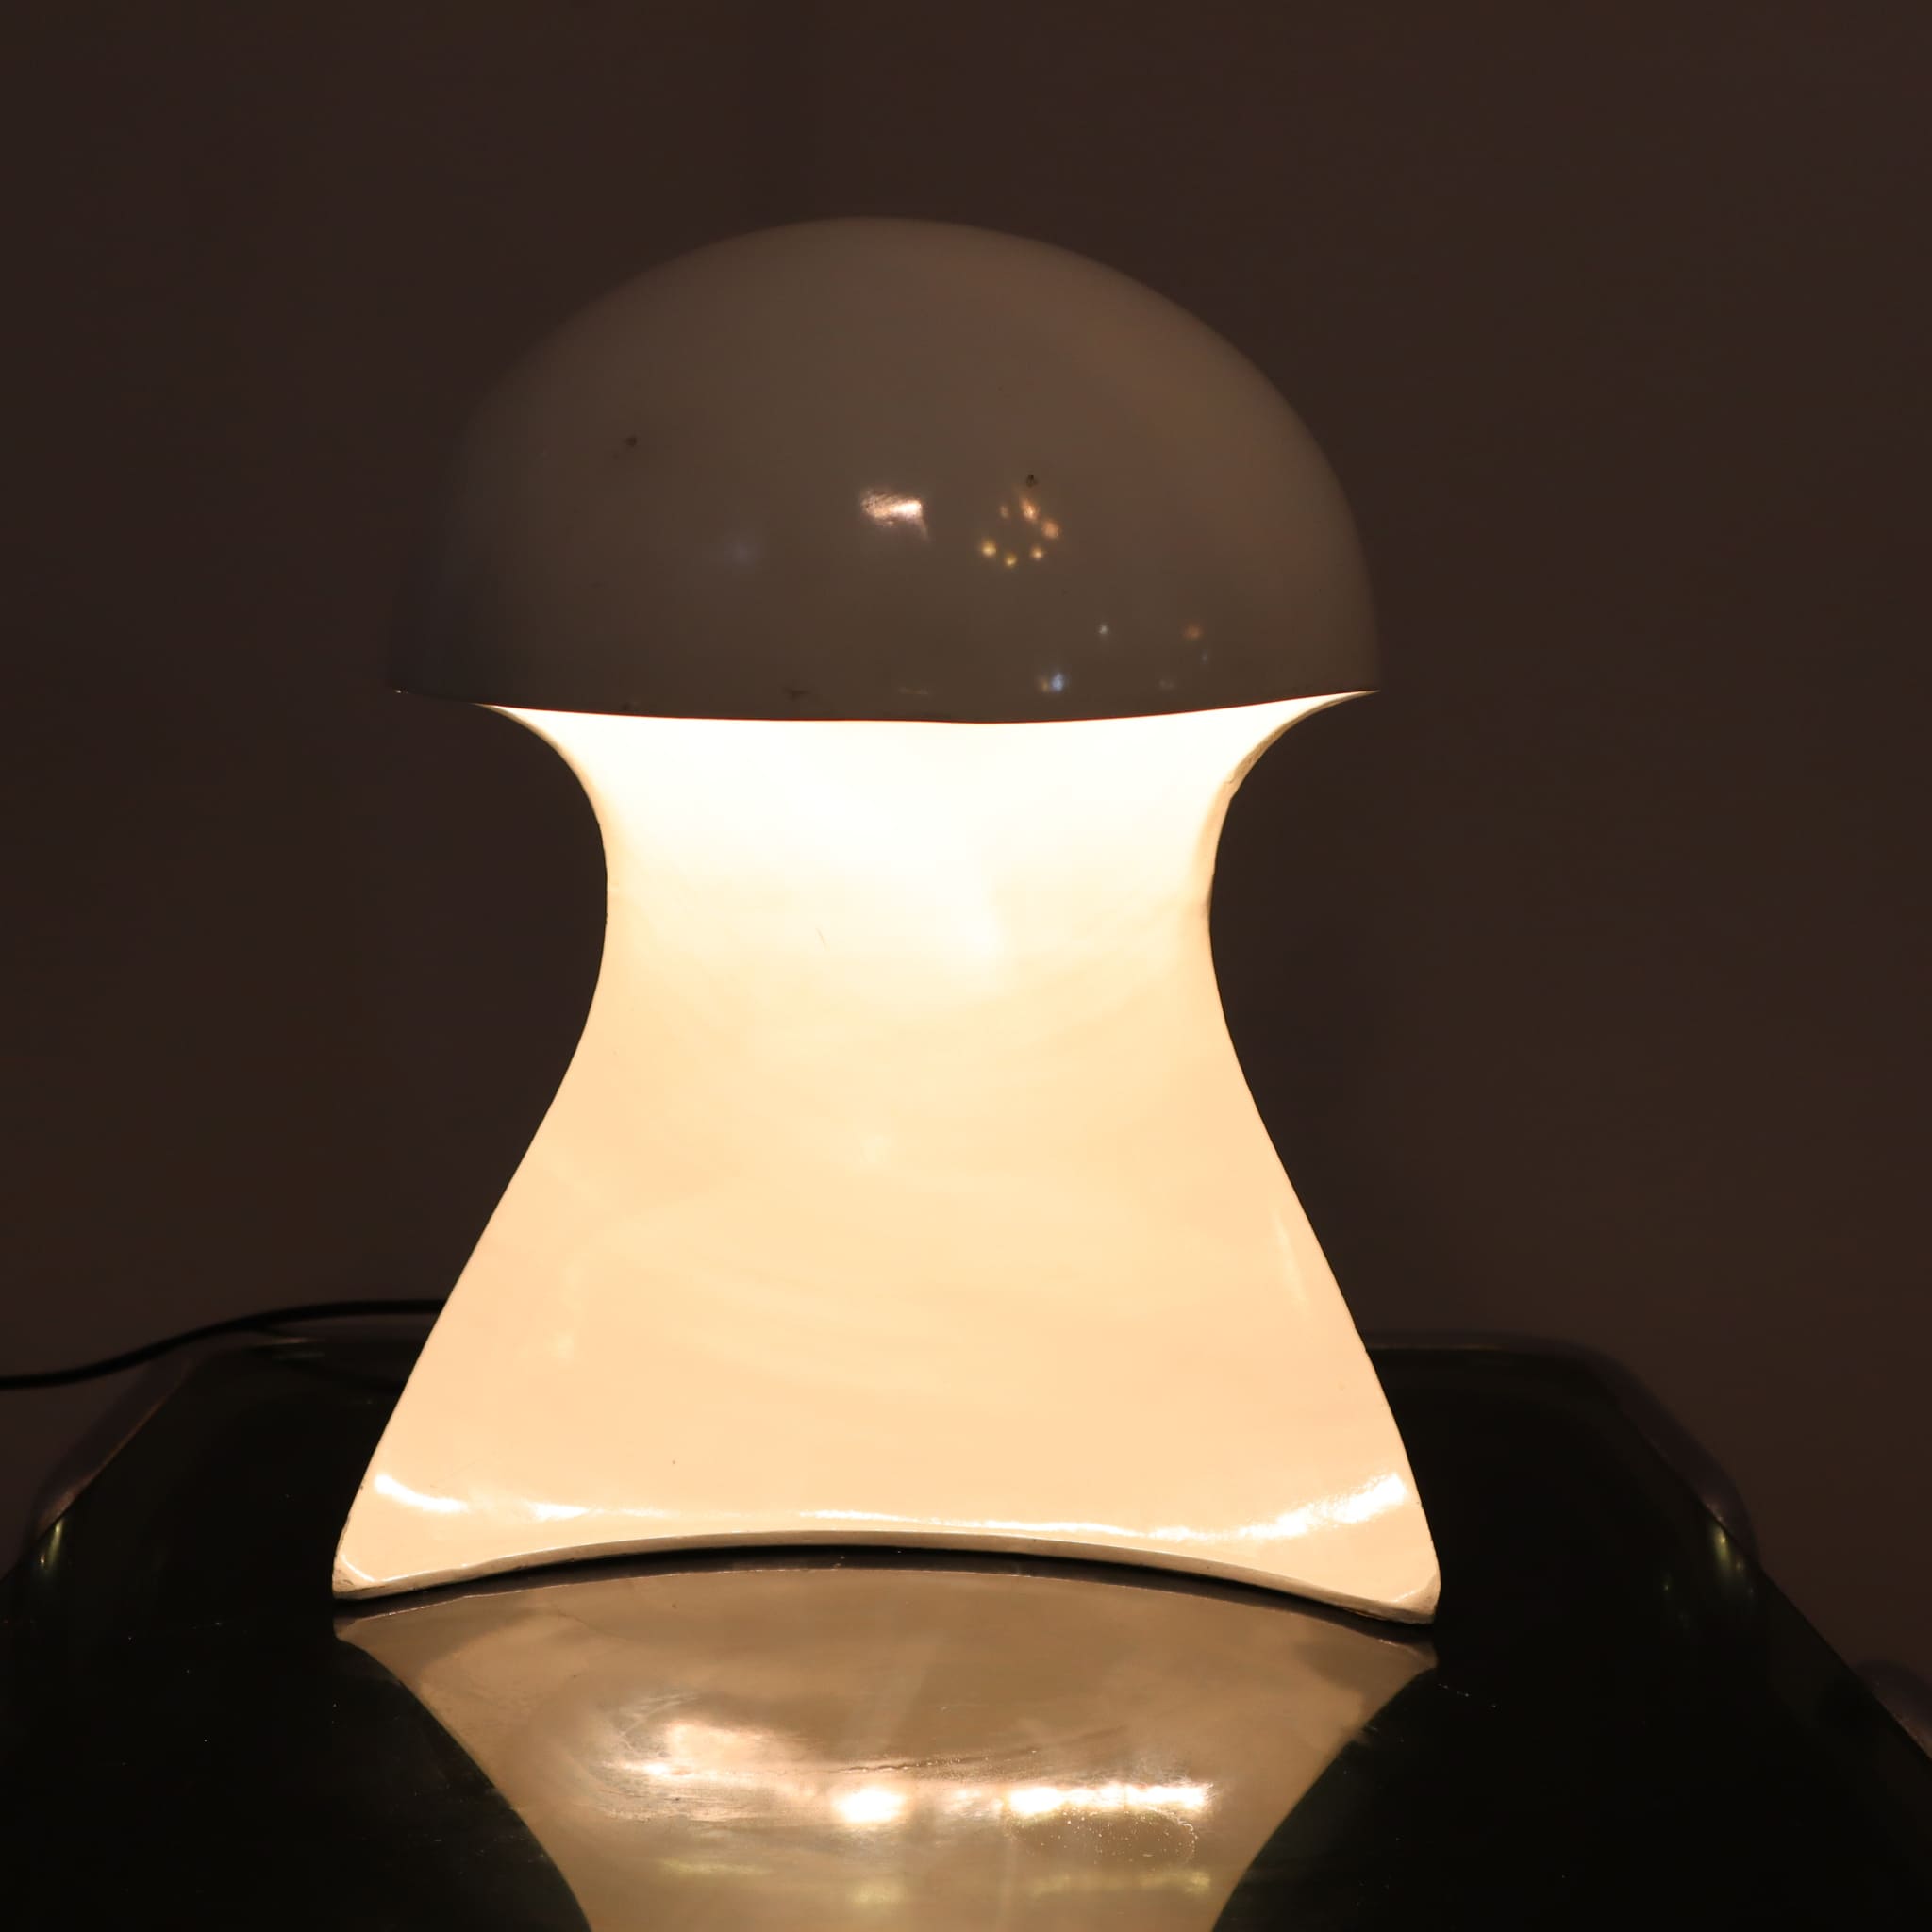 visionidepoca-lighting-table-lamp-70s-mod-dania-by-dario-tognon-and-studio-celli-for-artemide-frontal-view-illuminated-variant